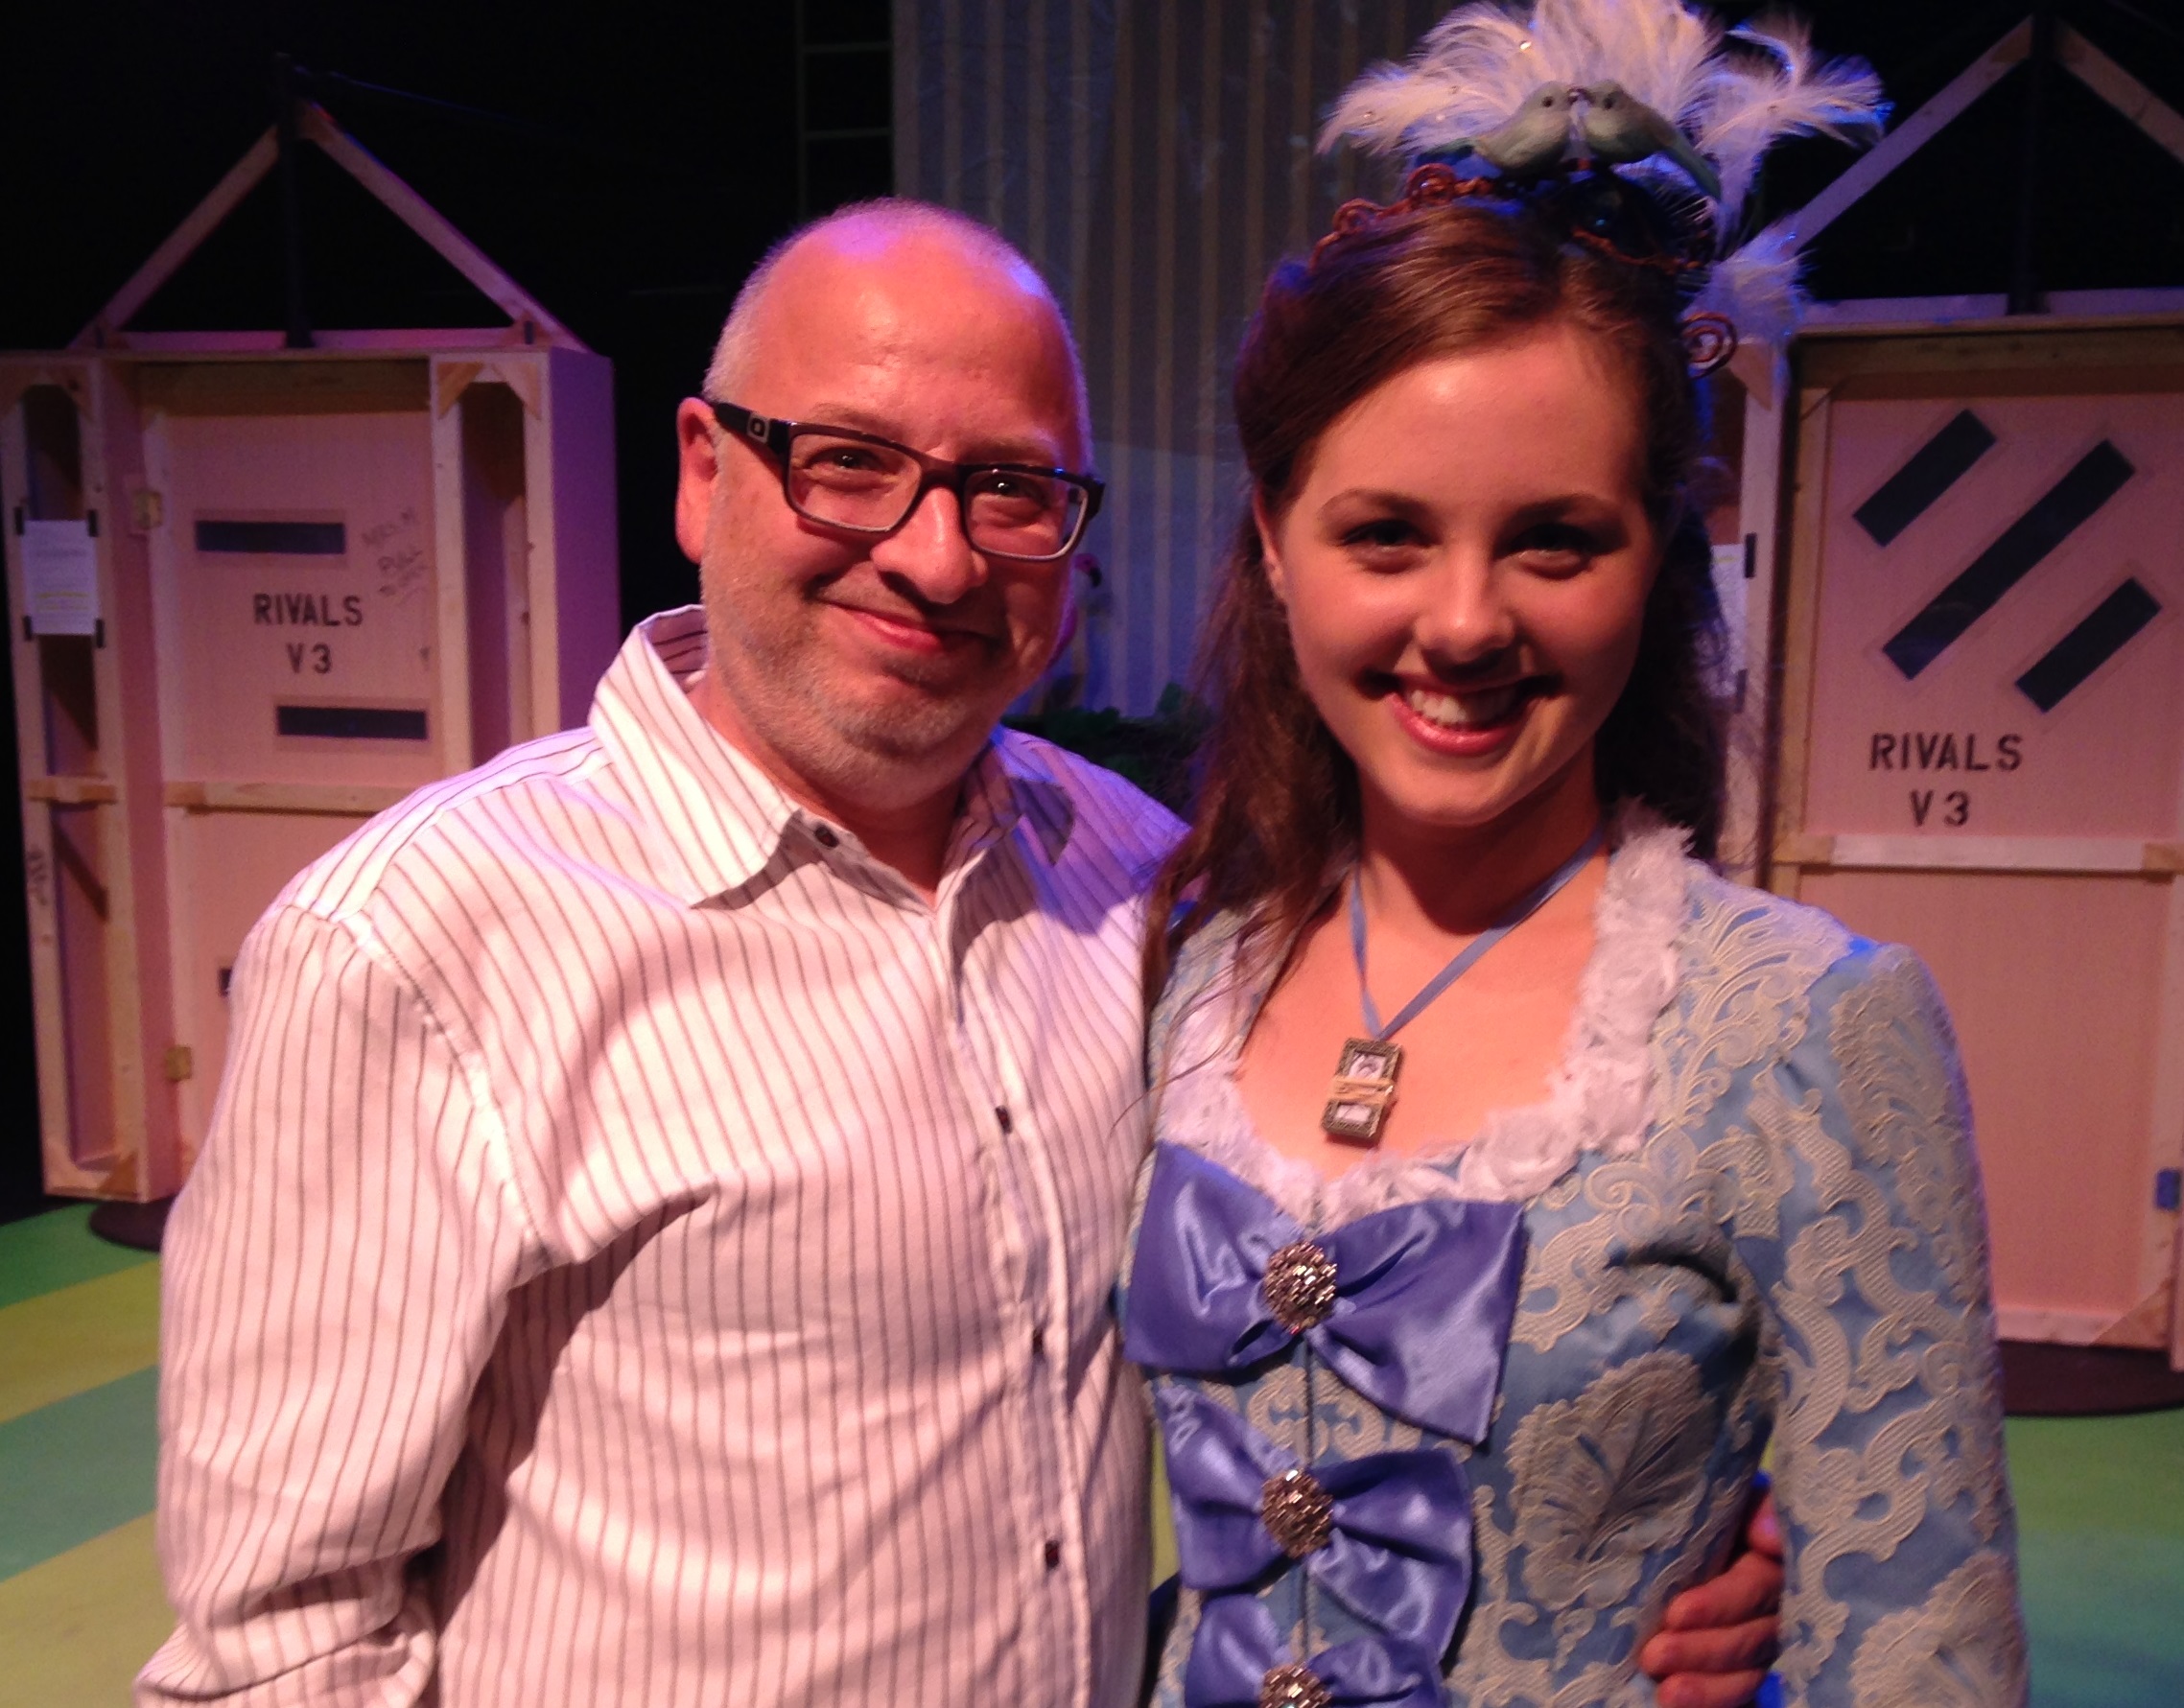 Stephen Donnelly with actress Sarah Beth Short at a performance of The Rivals in Raleigh, NC on 9/29/15